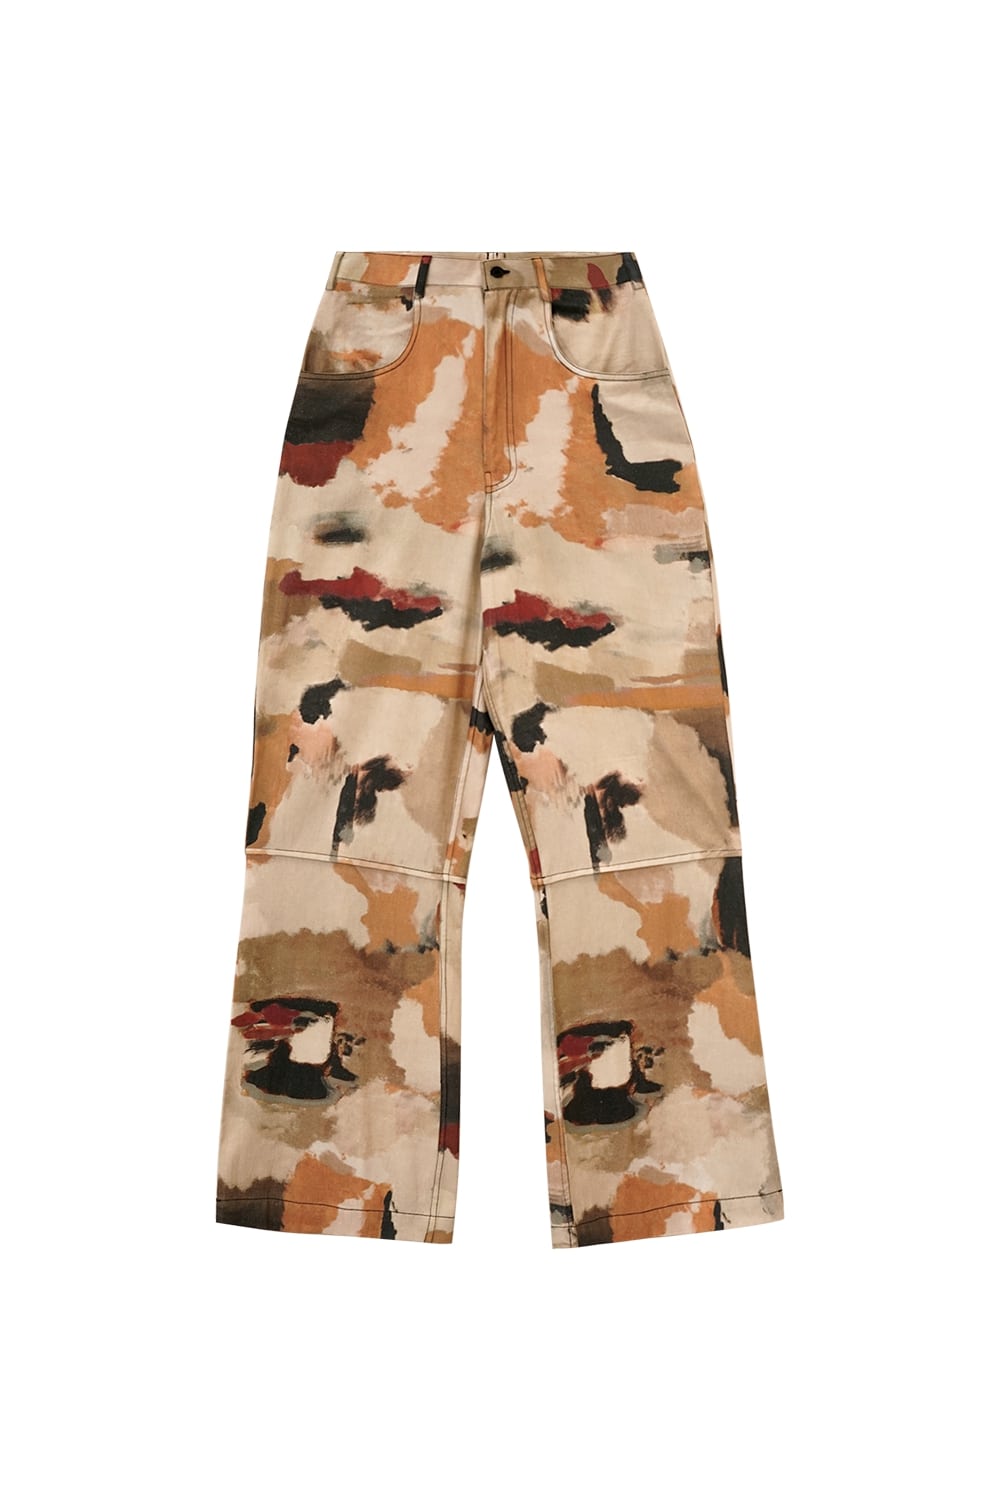 Rebirth Seltzer Trousers